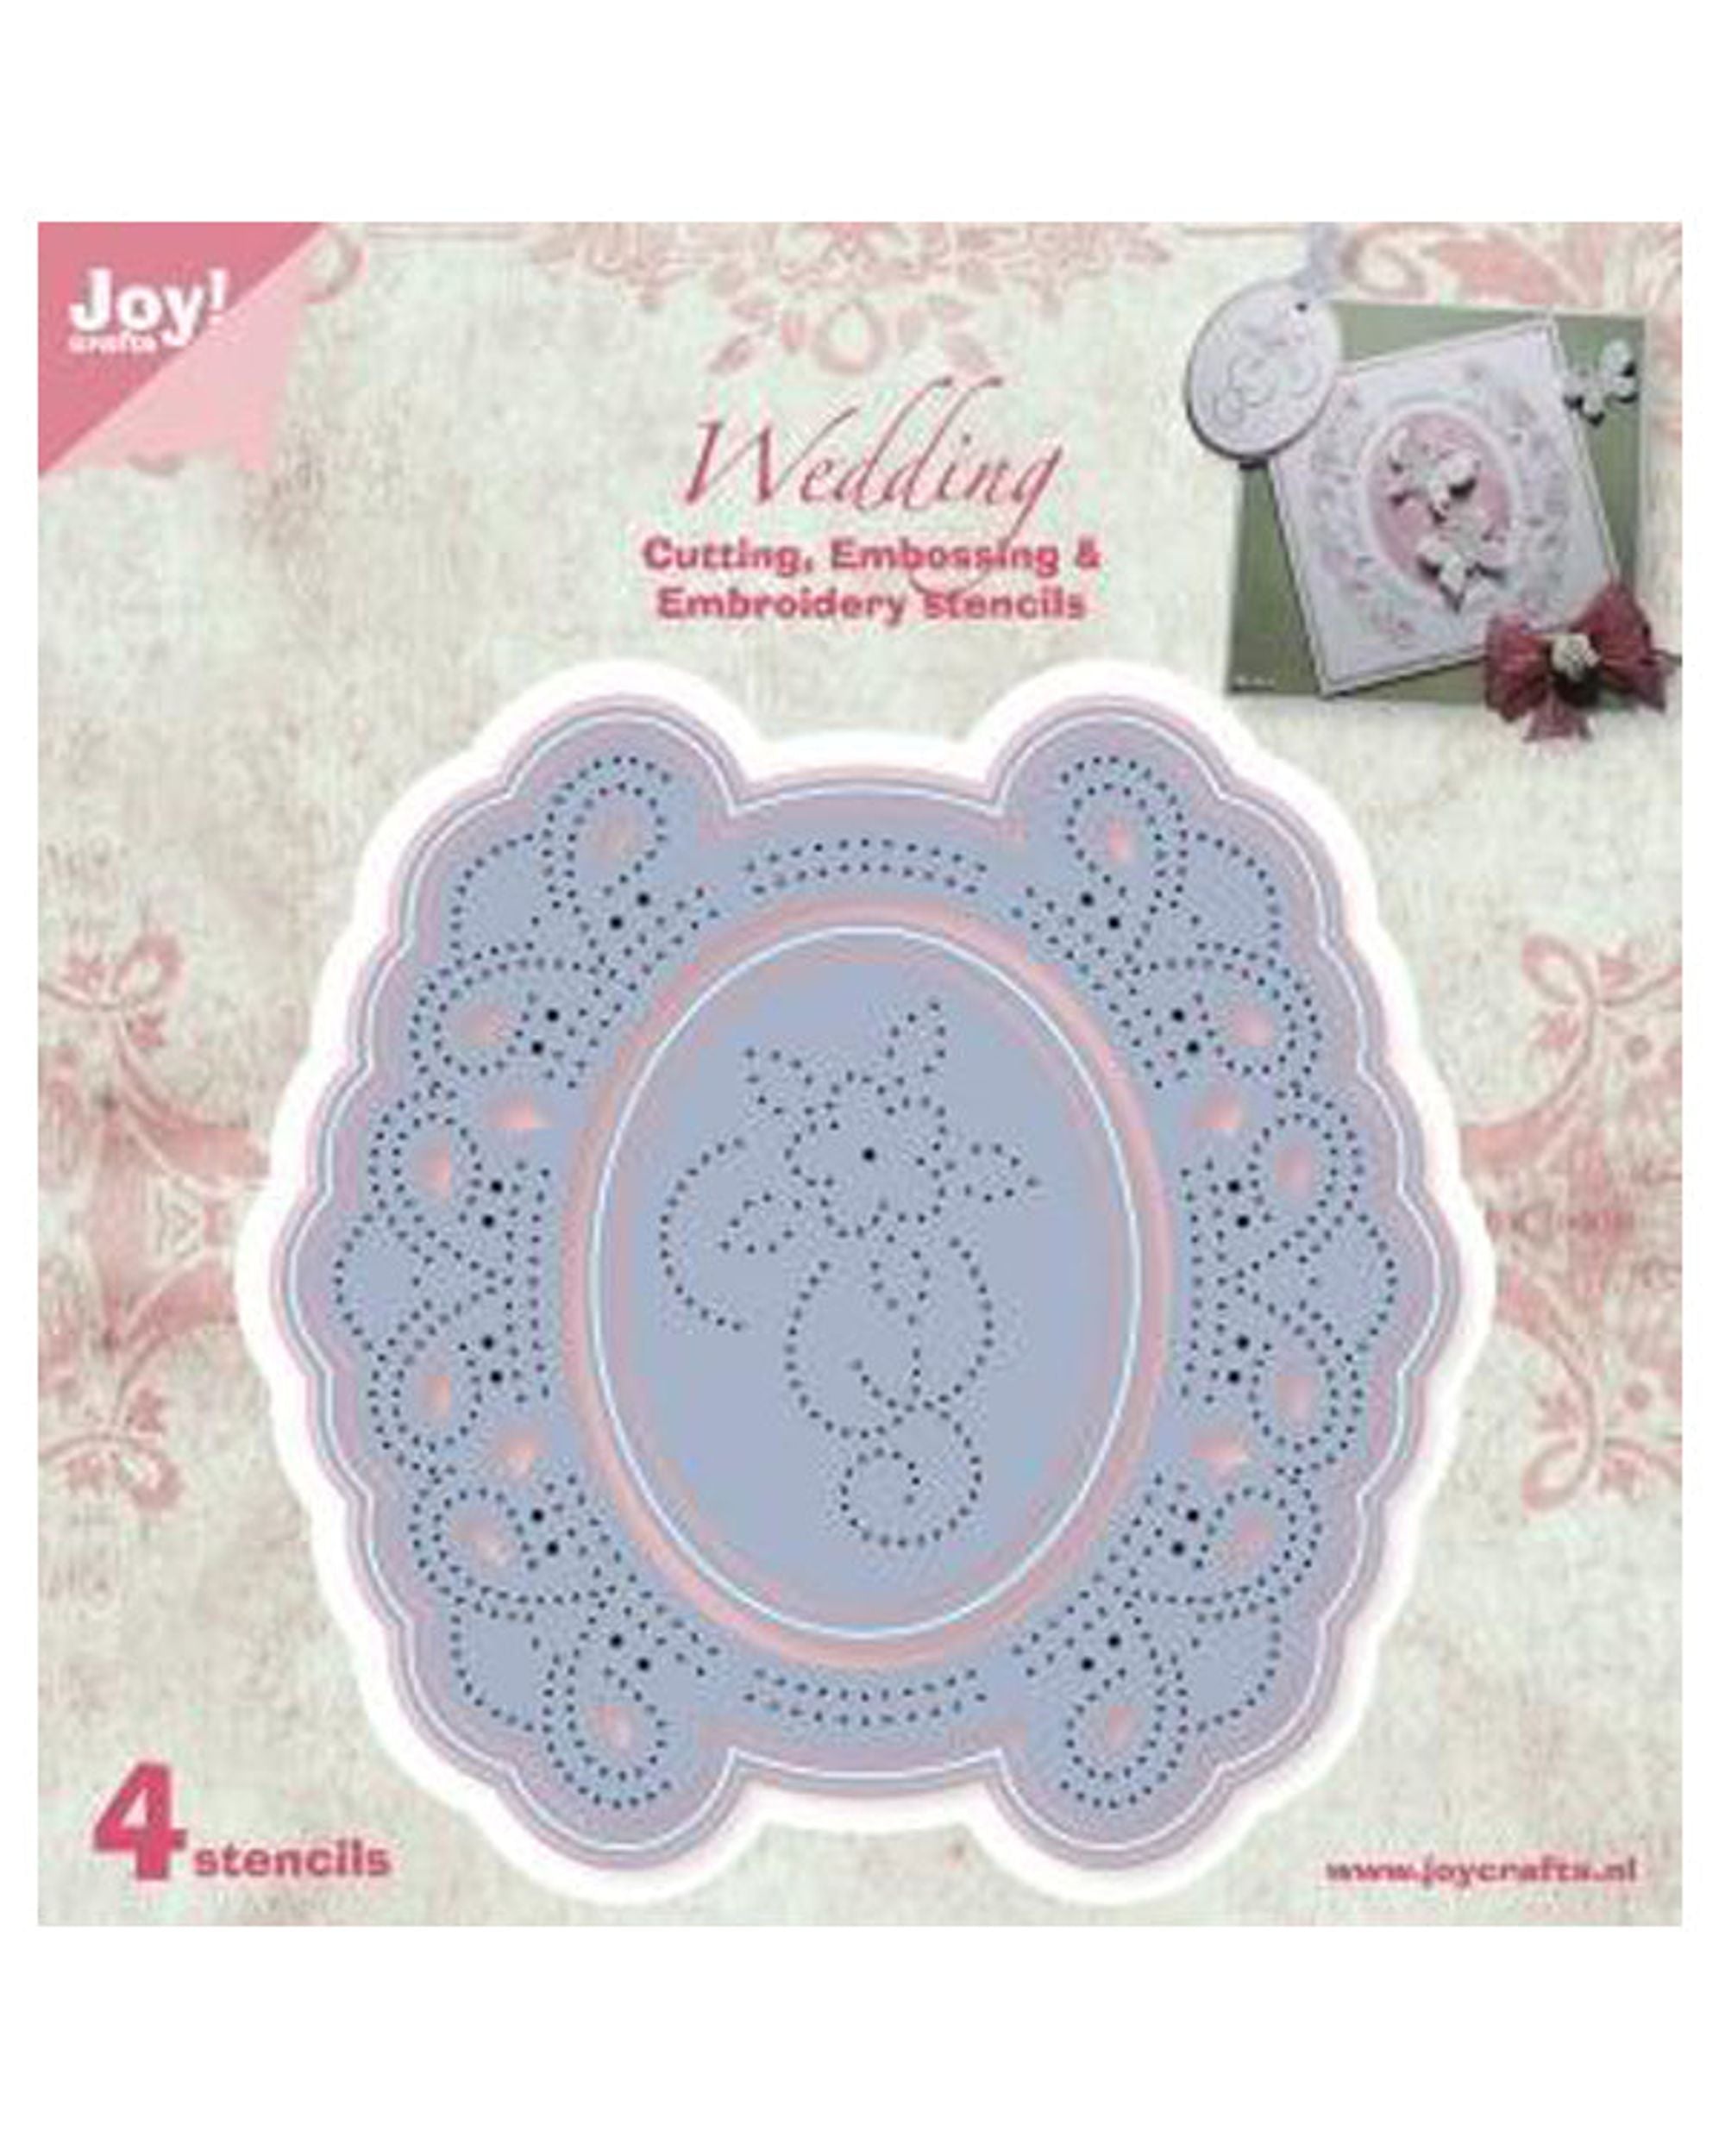 Joy! Crafts Cutting and De-bossing Embroidery Die - Circle Floral Frame